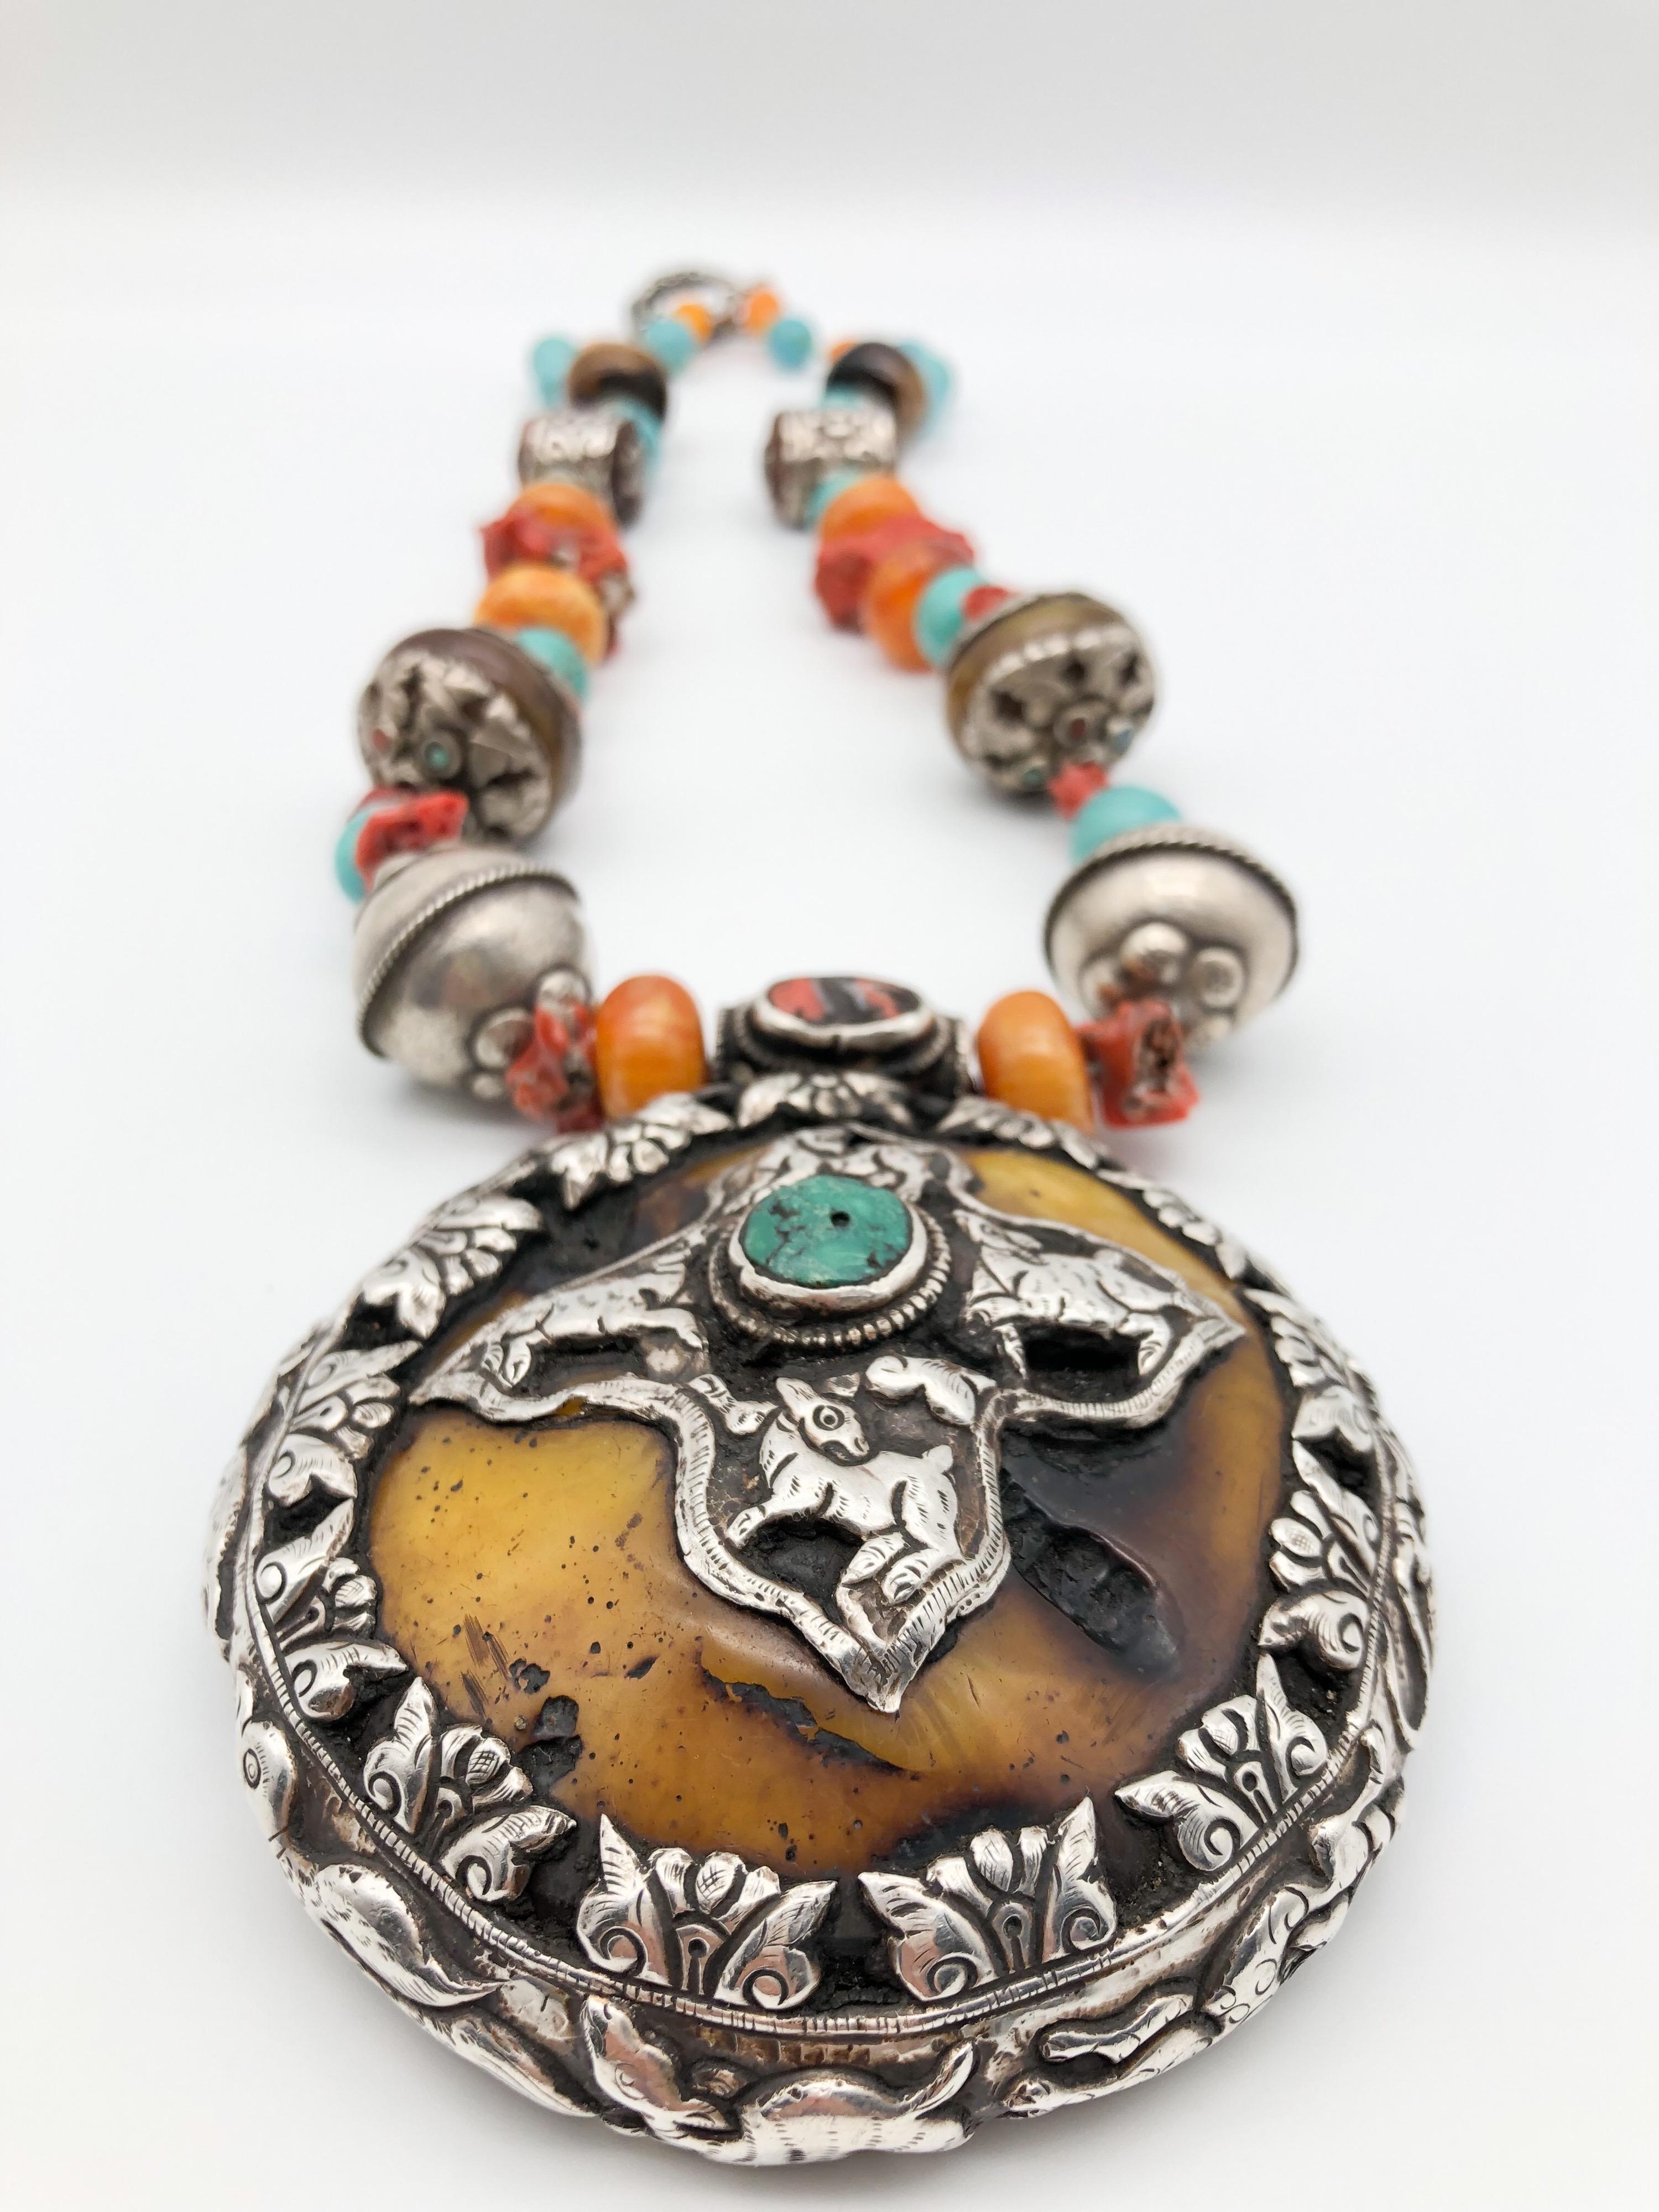 Mixed Cut A.Jeschel Magnificent necklace with Tibetan Bold Sterling Silver Pendant For Sale